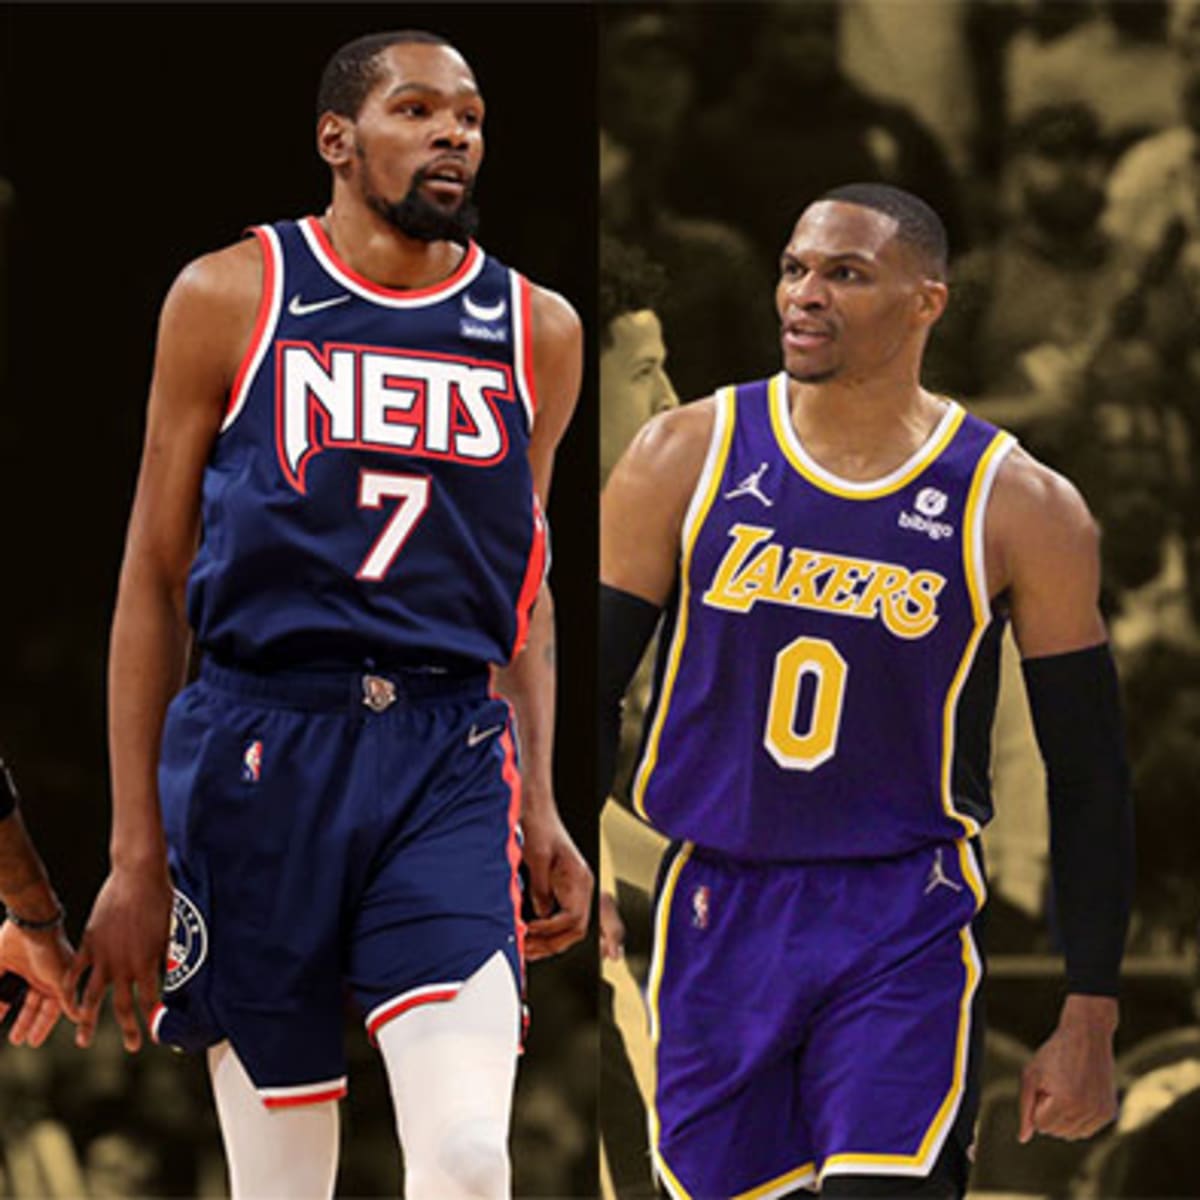 Golden State Warriors: Lakers chaos impacts Kevin Durant's free agency